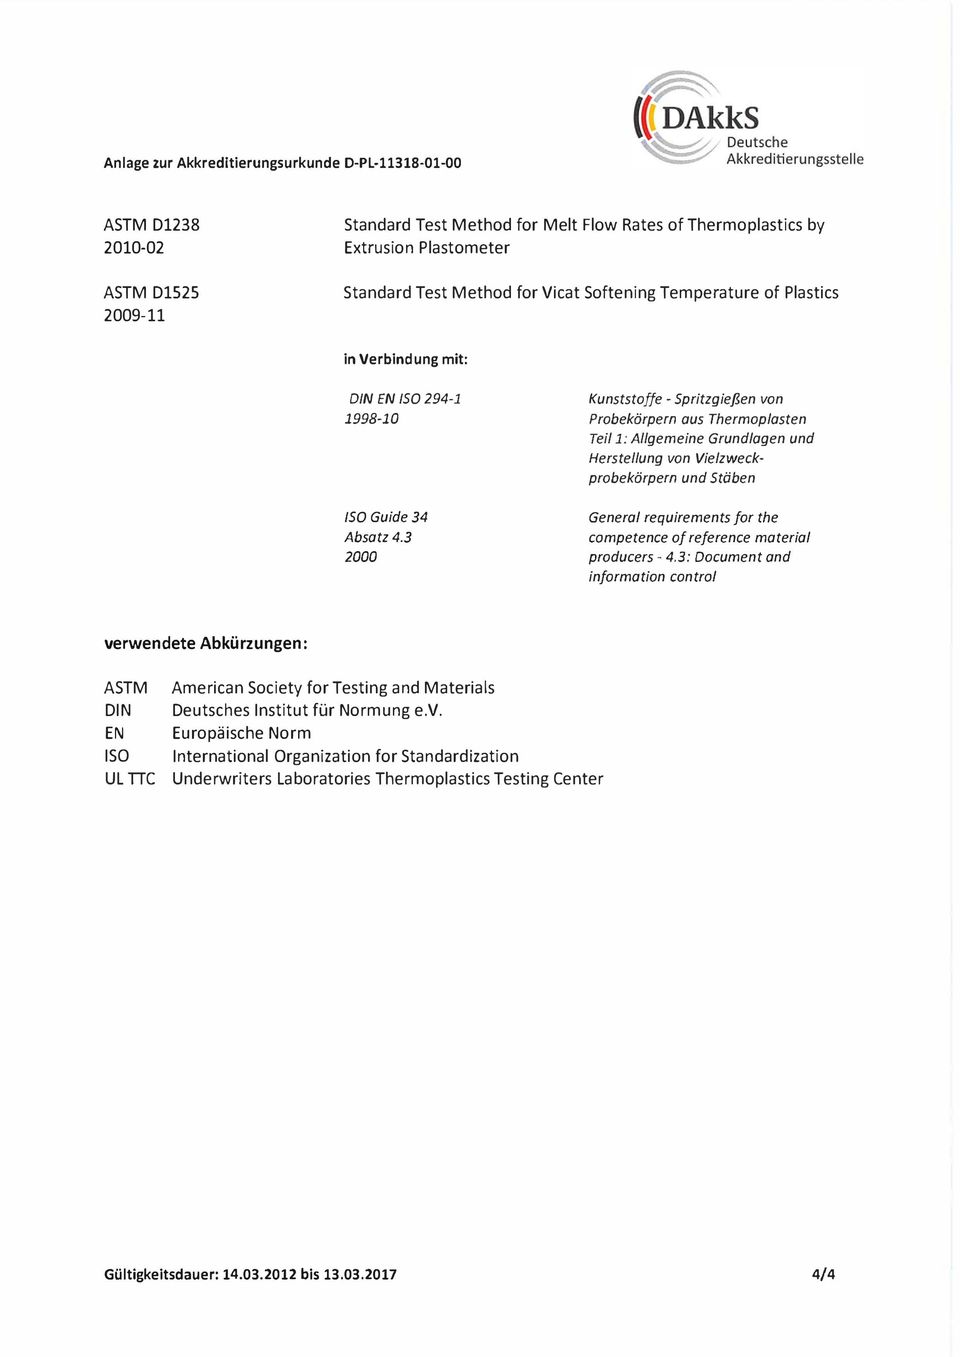 Vielzweck probekörpern und Stöben ISO Guide 34 Absatz 4.3 2000 General requirements for the campetenee of referenee material producers 4.